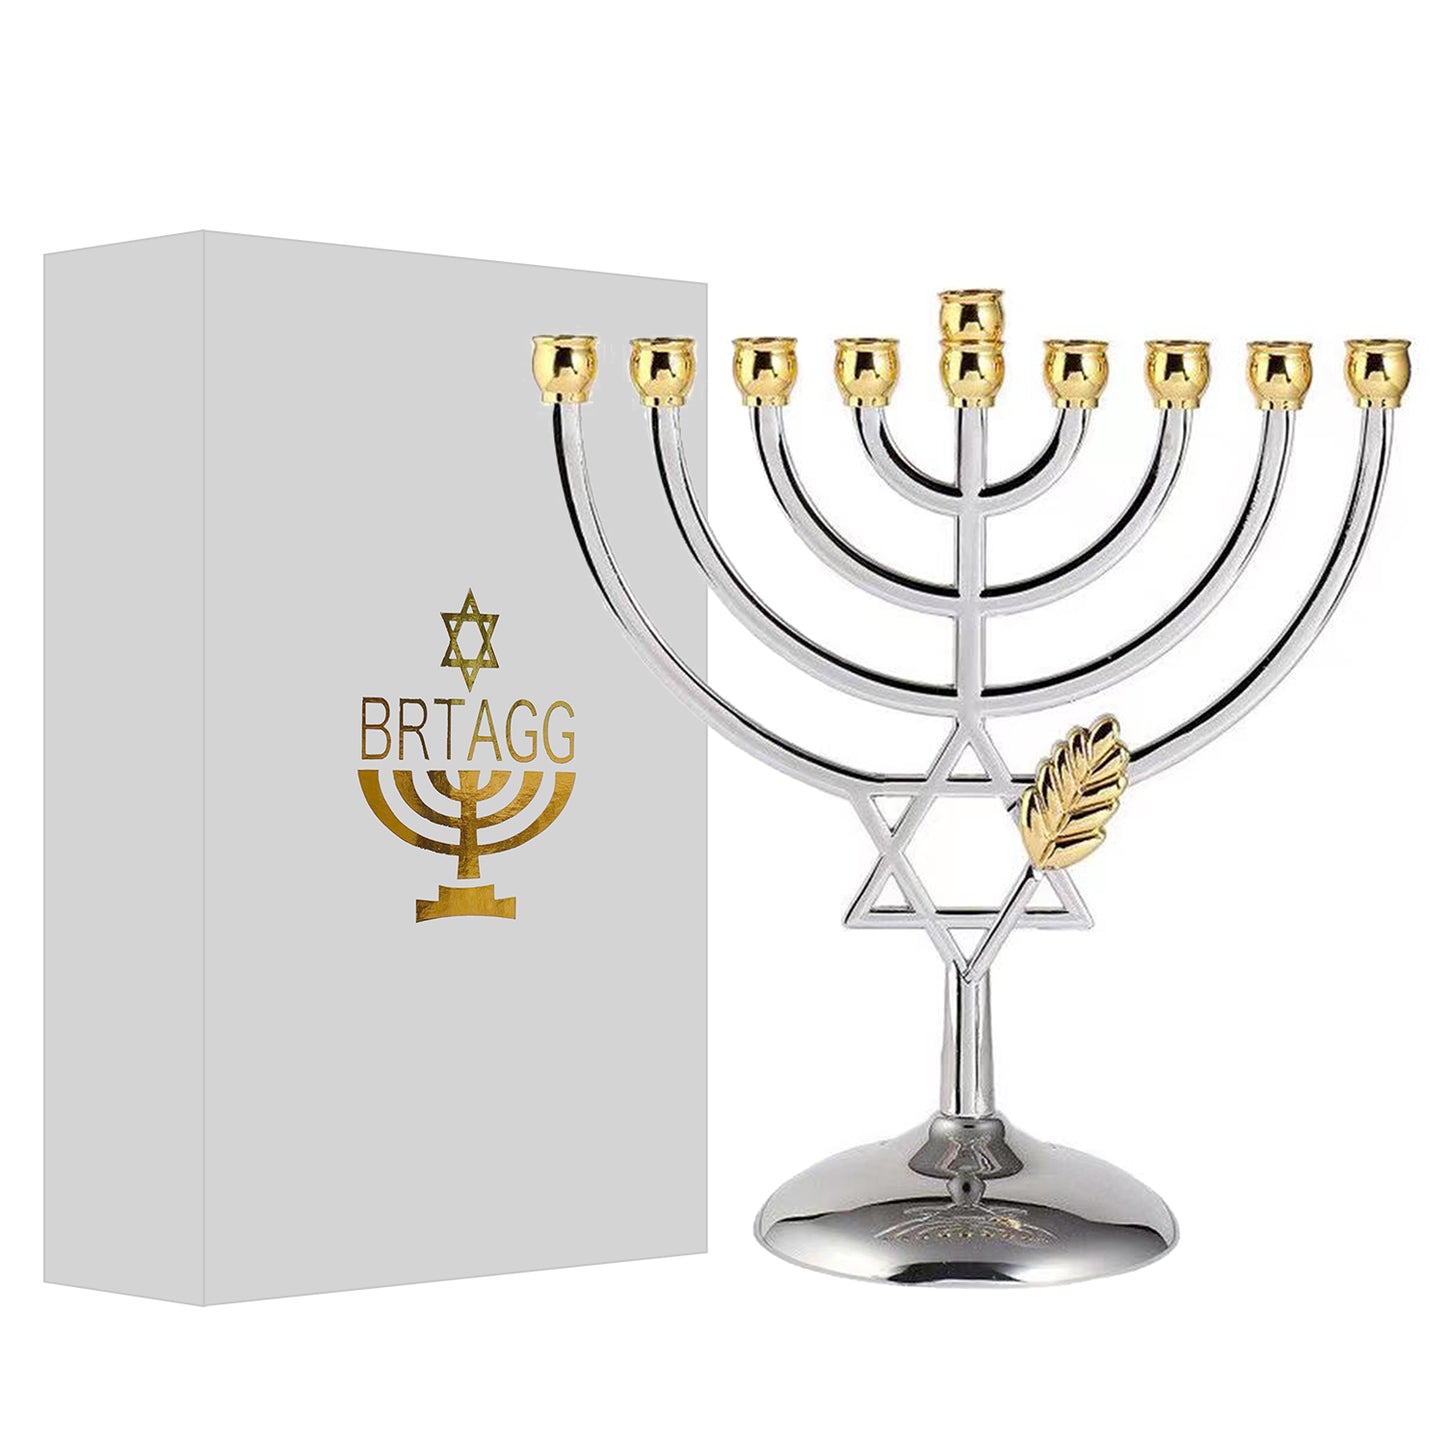 BRTAGG Hanukkah Menorah Upgrade Cups with Built-in Pins, Star of David Candle Holders 9 Branches, Silverplated Full Size Non Tarnish, Jewish Gifts (7 inch)